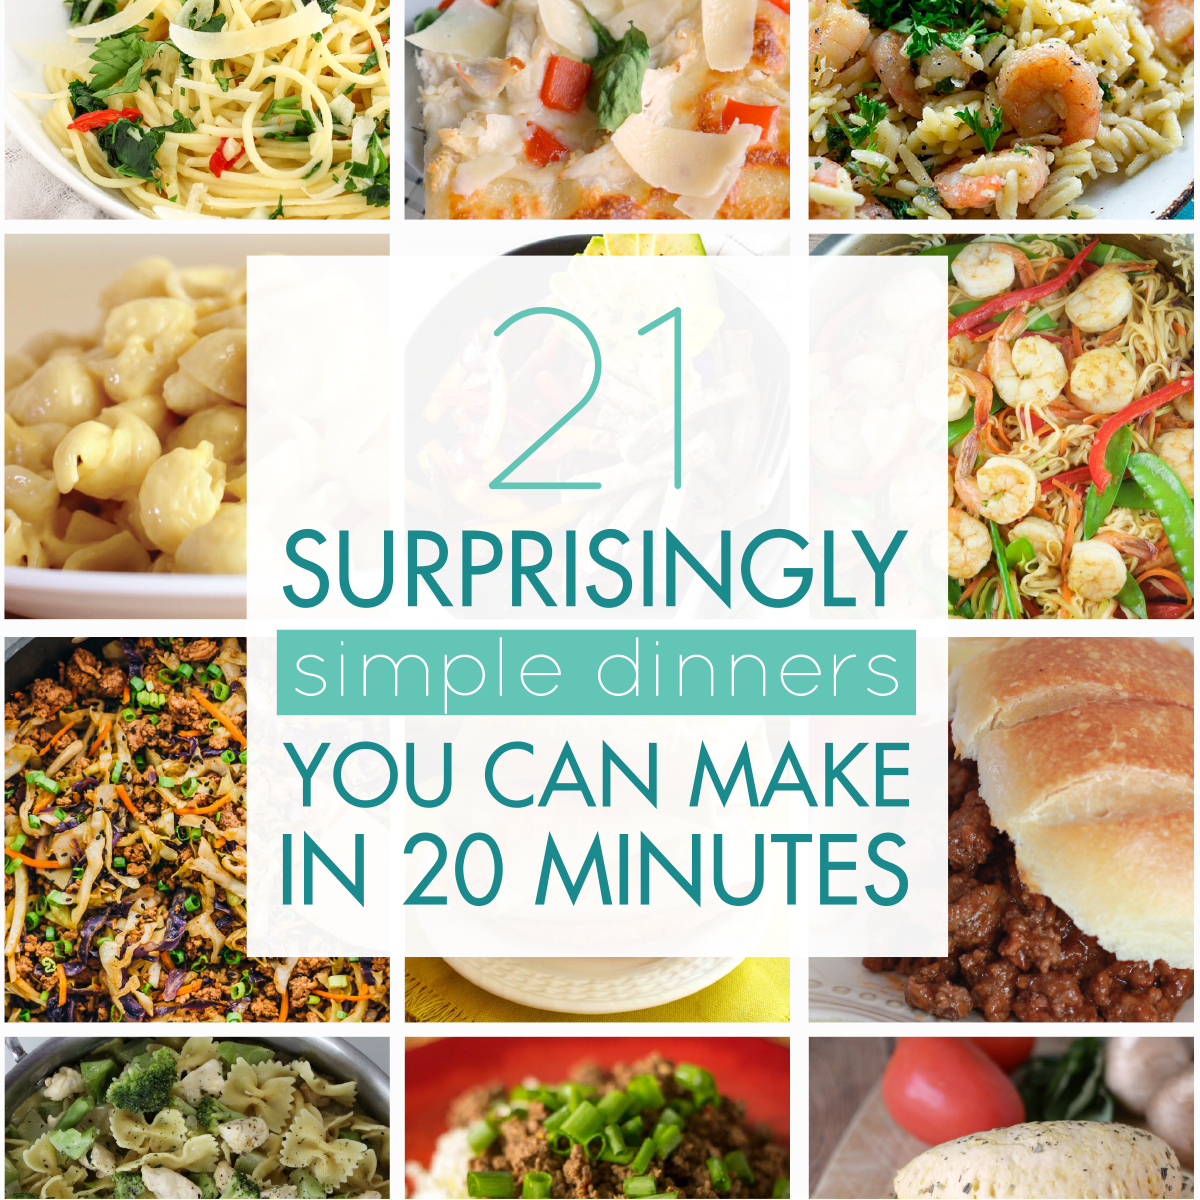 21 Surprisingly Simple Dinners You Can Make in 20 Minutes